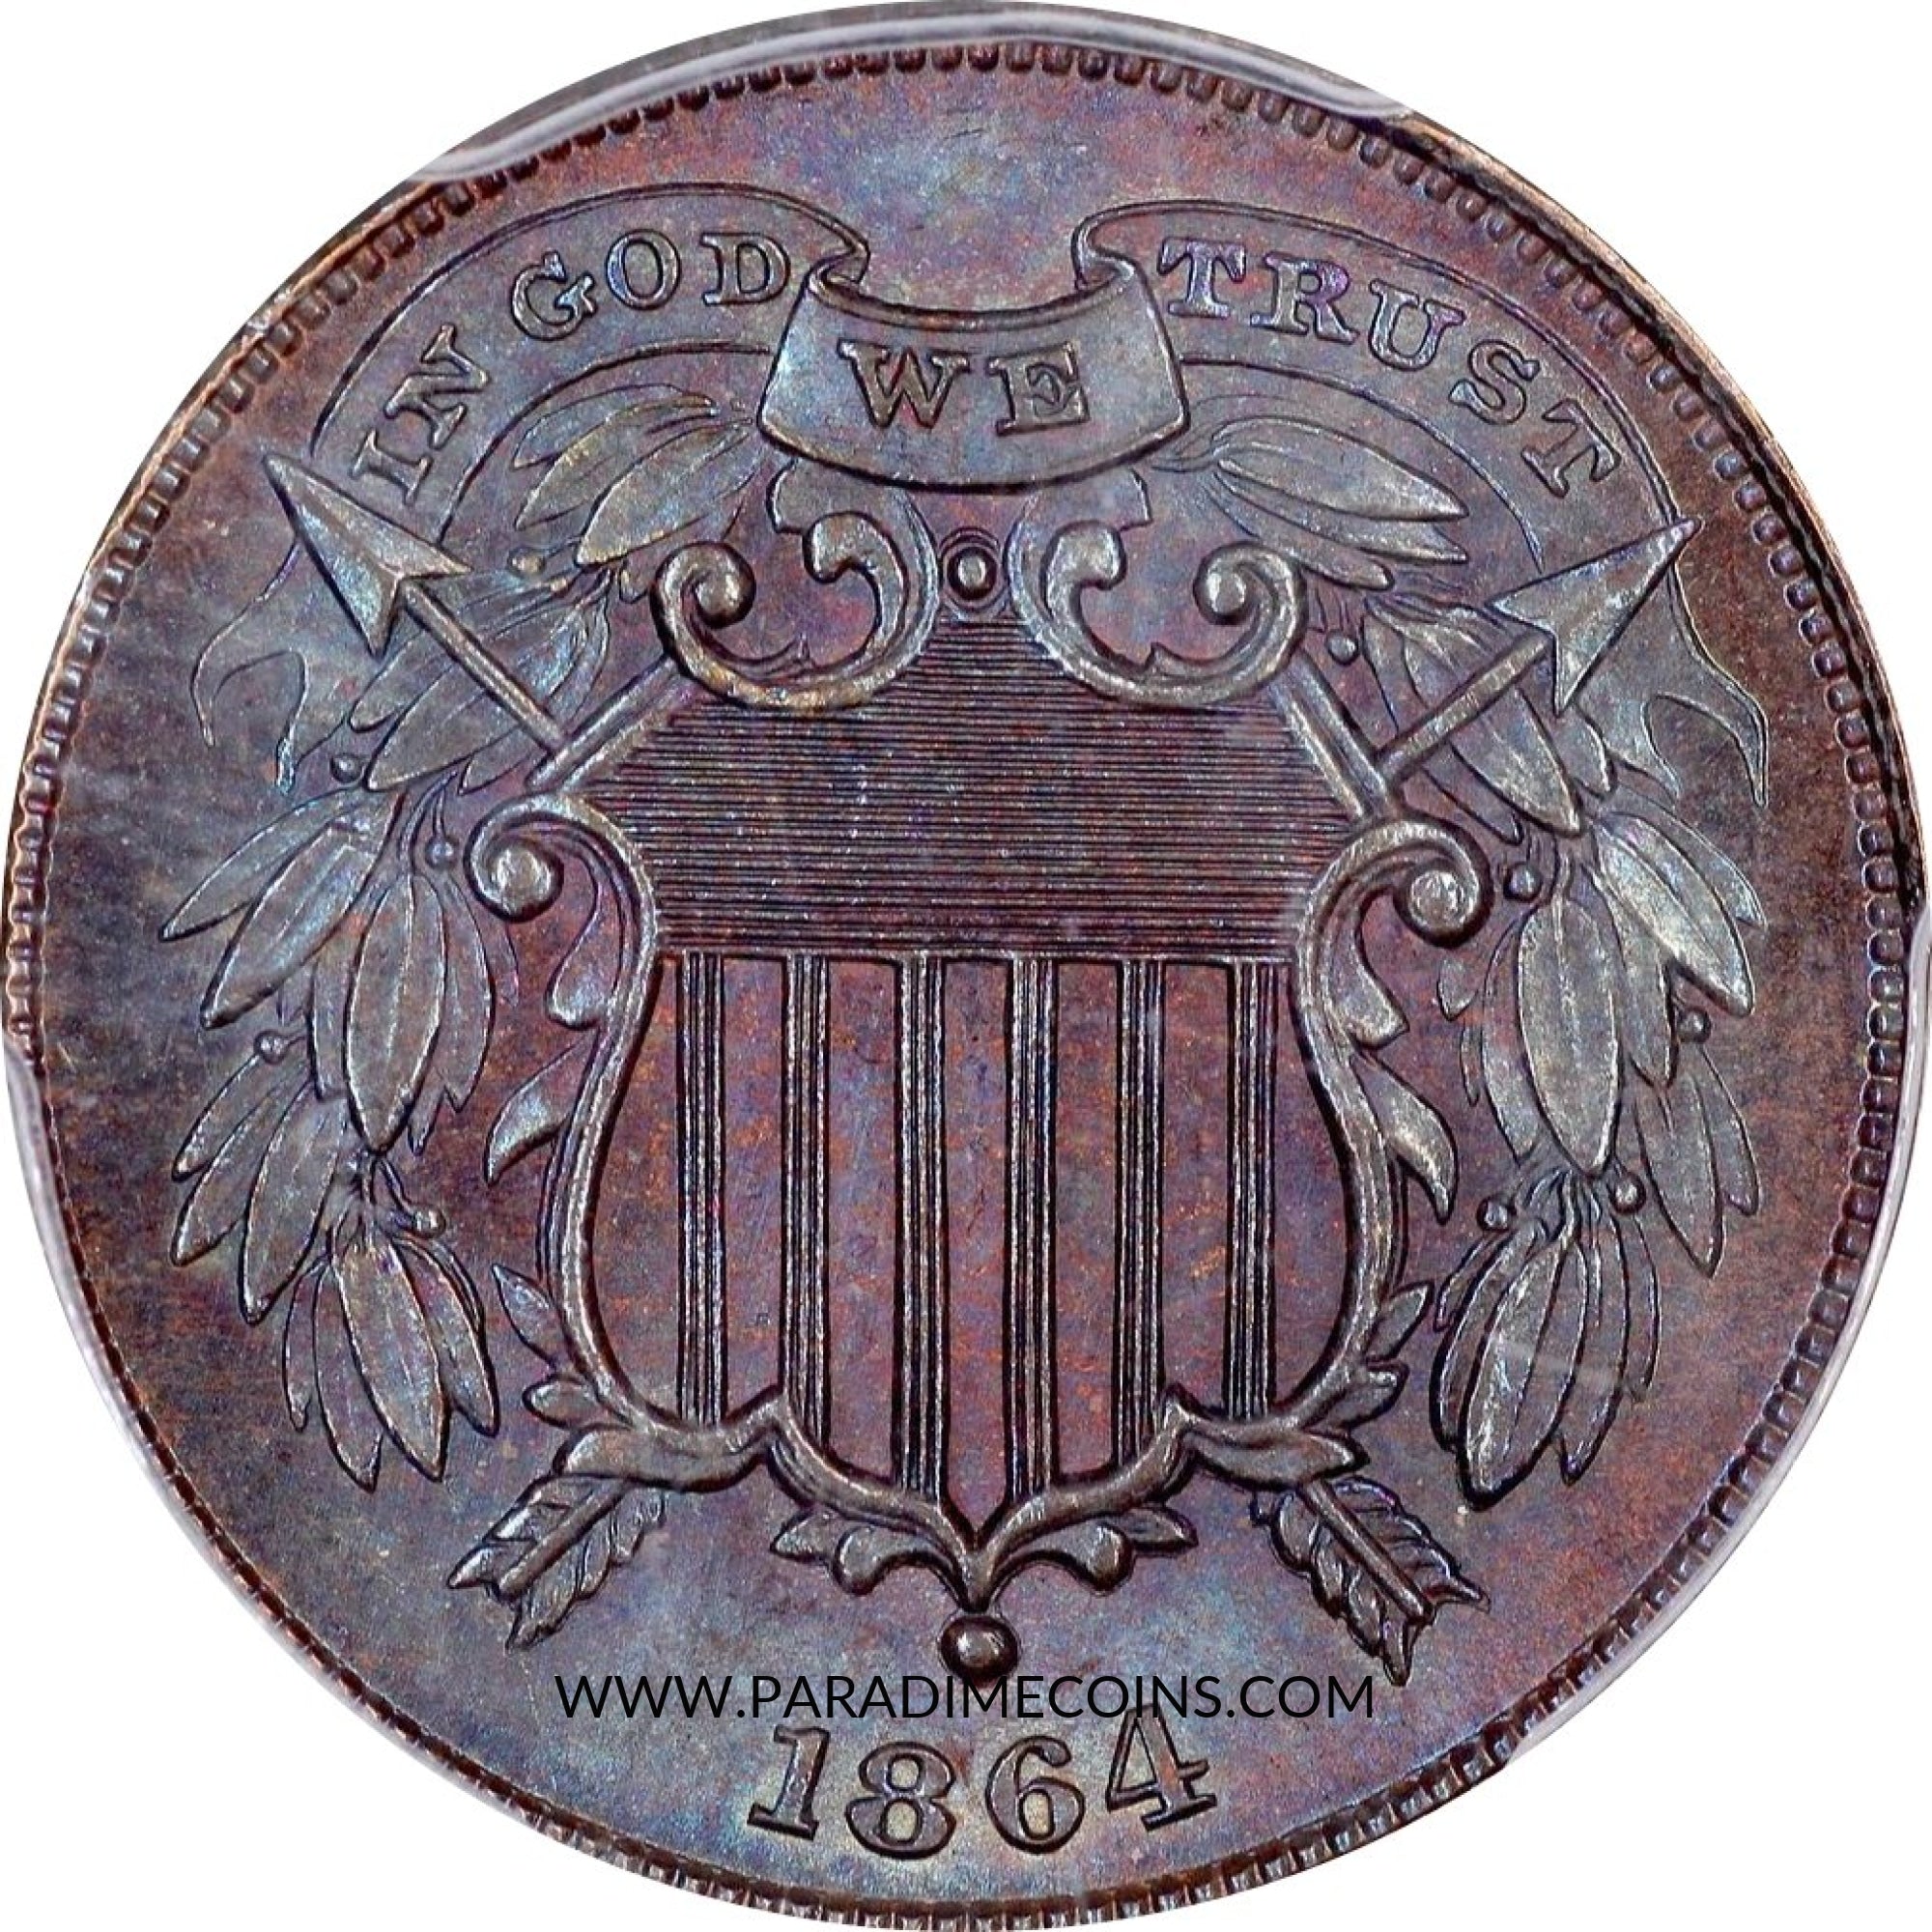 1864 2C SMALL MOTTO MS65 BROWN PCGS. - Paradime Coins | PCGS NGC CACG CAC Rare US Numismatic Coins For Sale